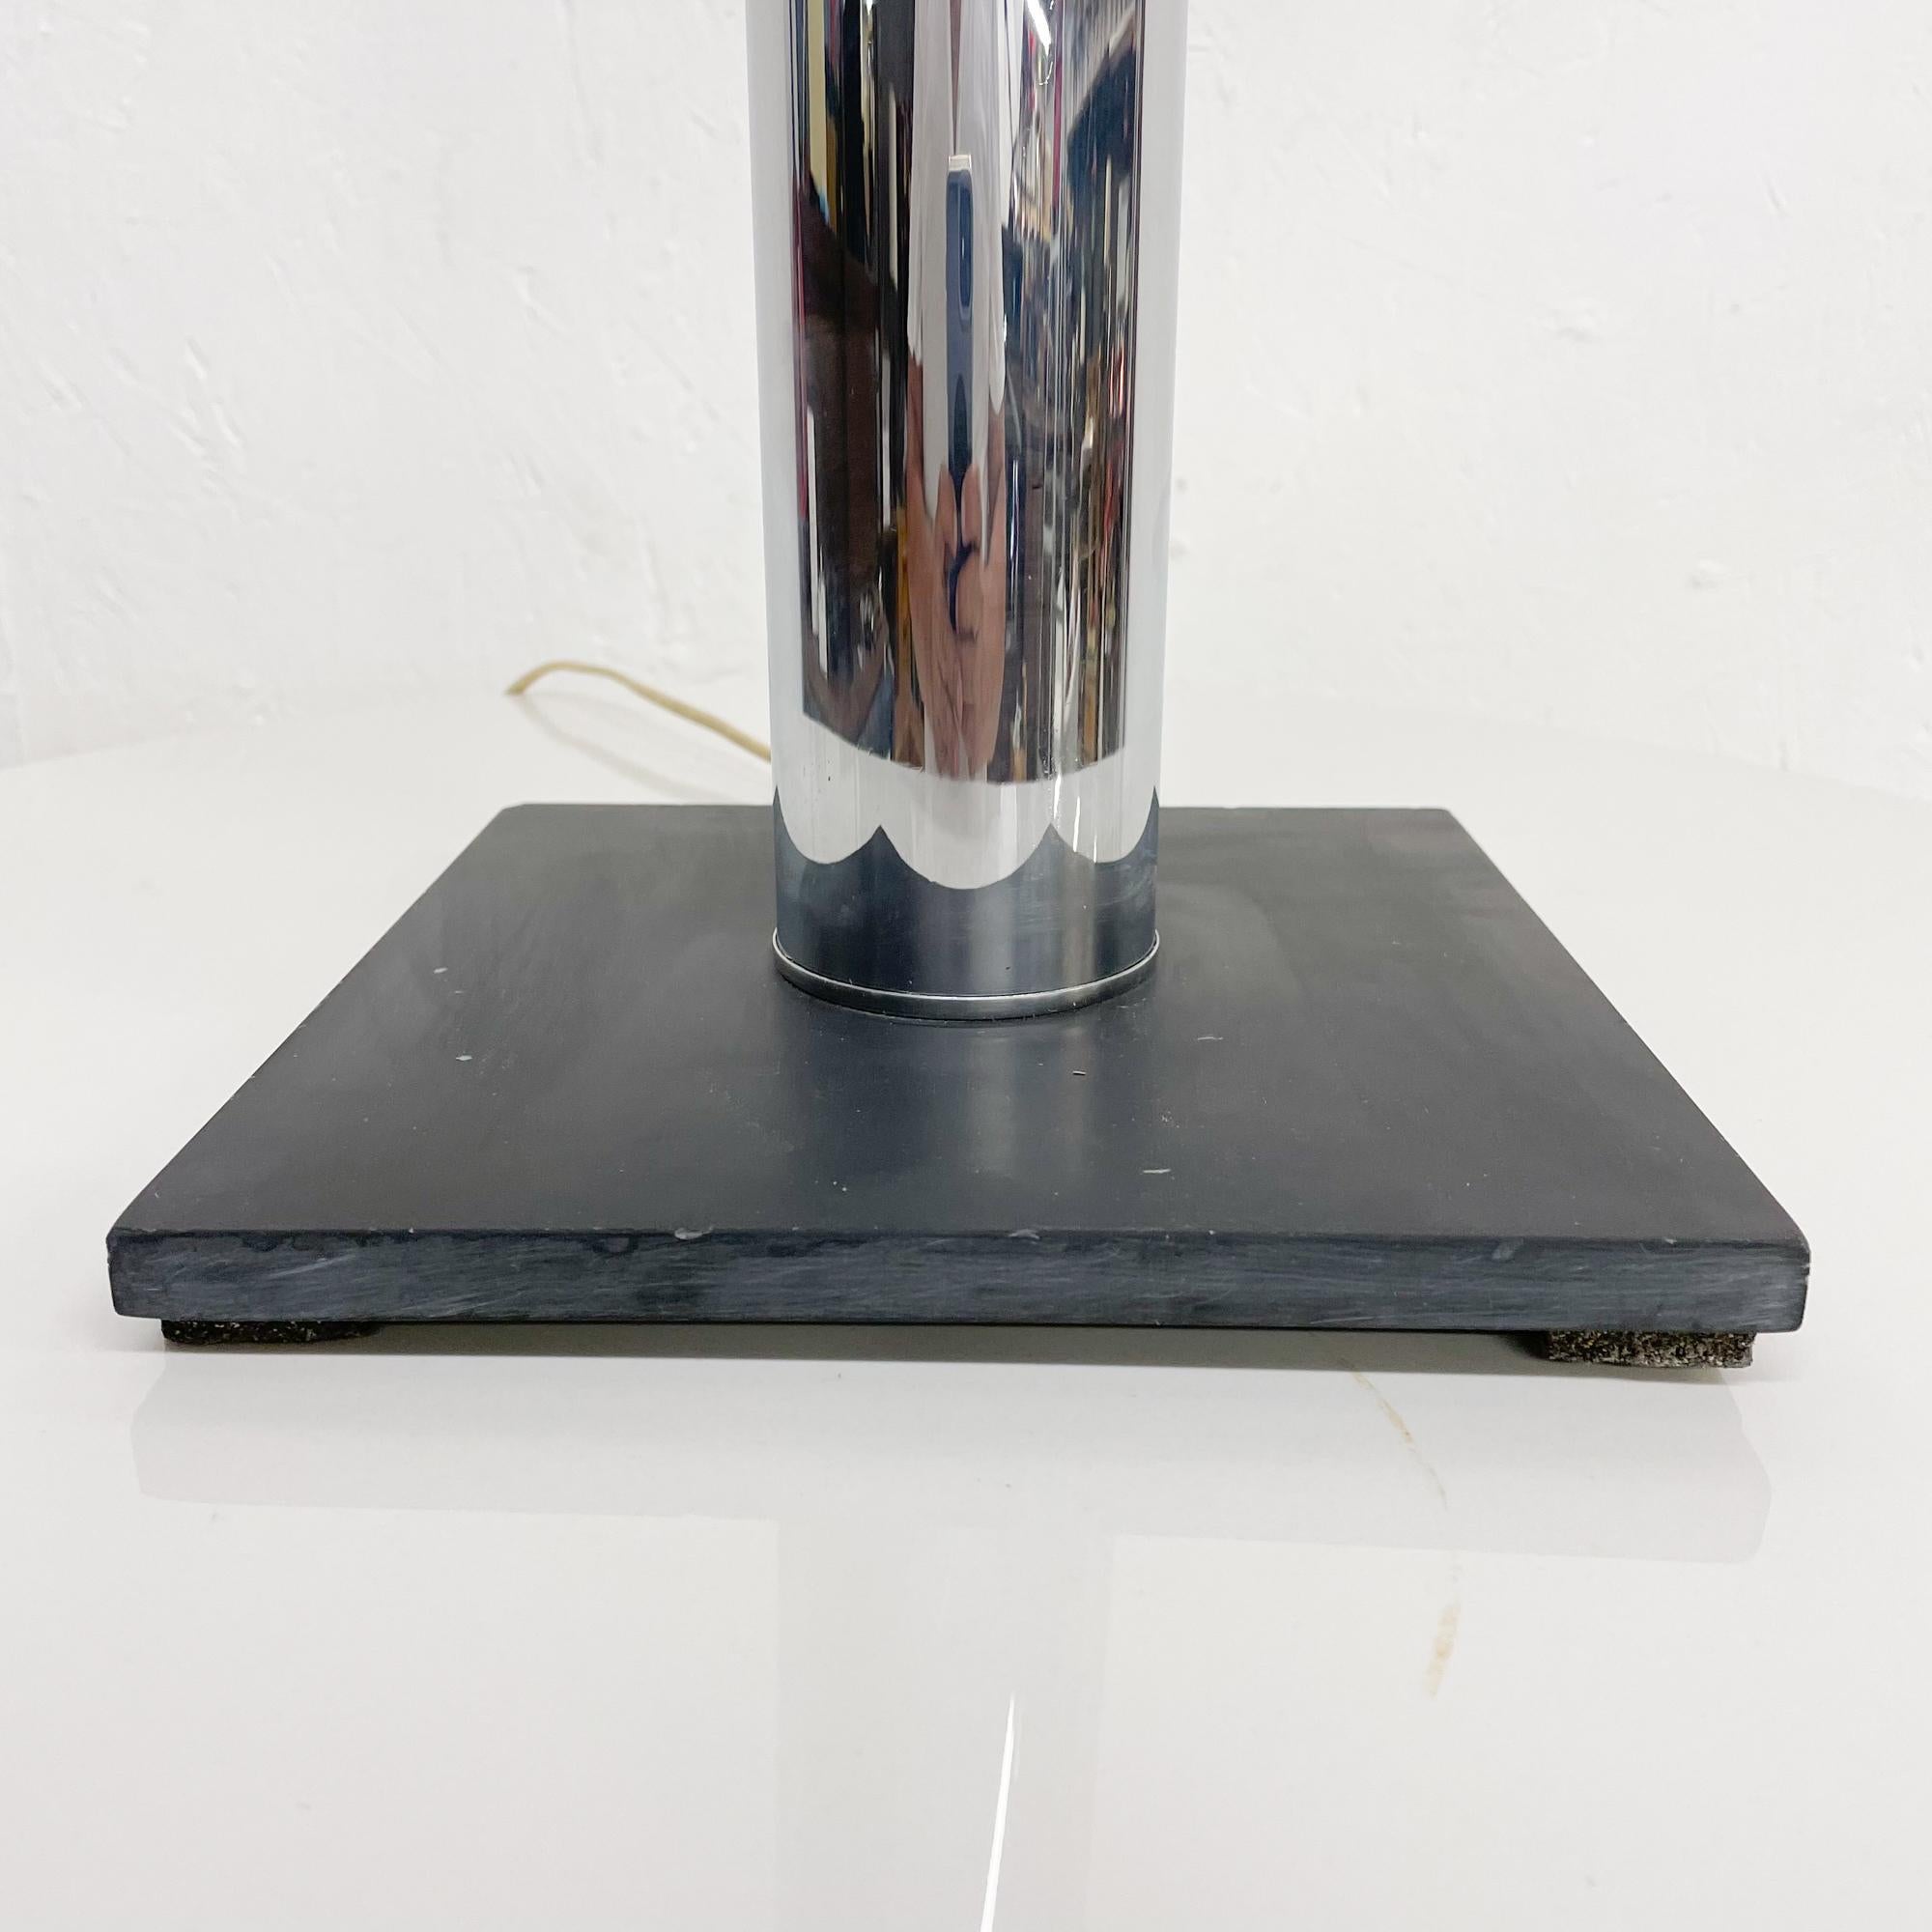 For your consideration: Walter Von Nessen New York Mid-Century Modern 1970s Bronx NY
Single table lamp chrome plated modern cylinder tower on black platform base.
Two socket lamp. No shade is included.
Measures: 33.5 H x 8 W x 8 D inches
Maker